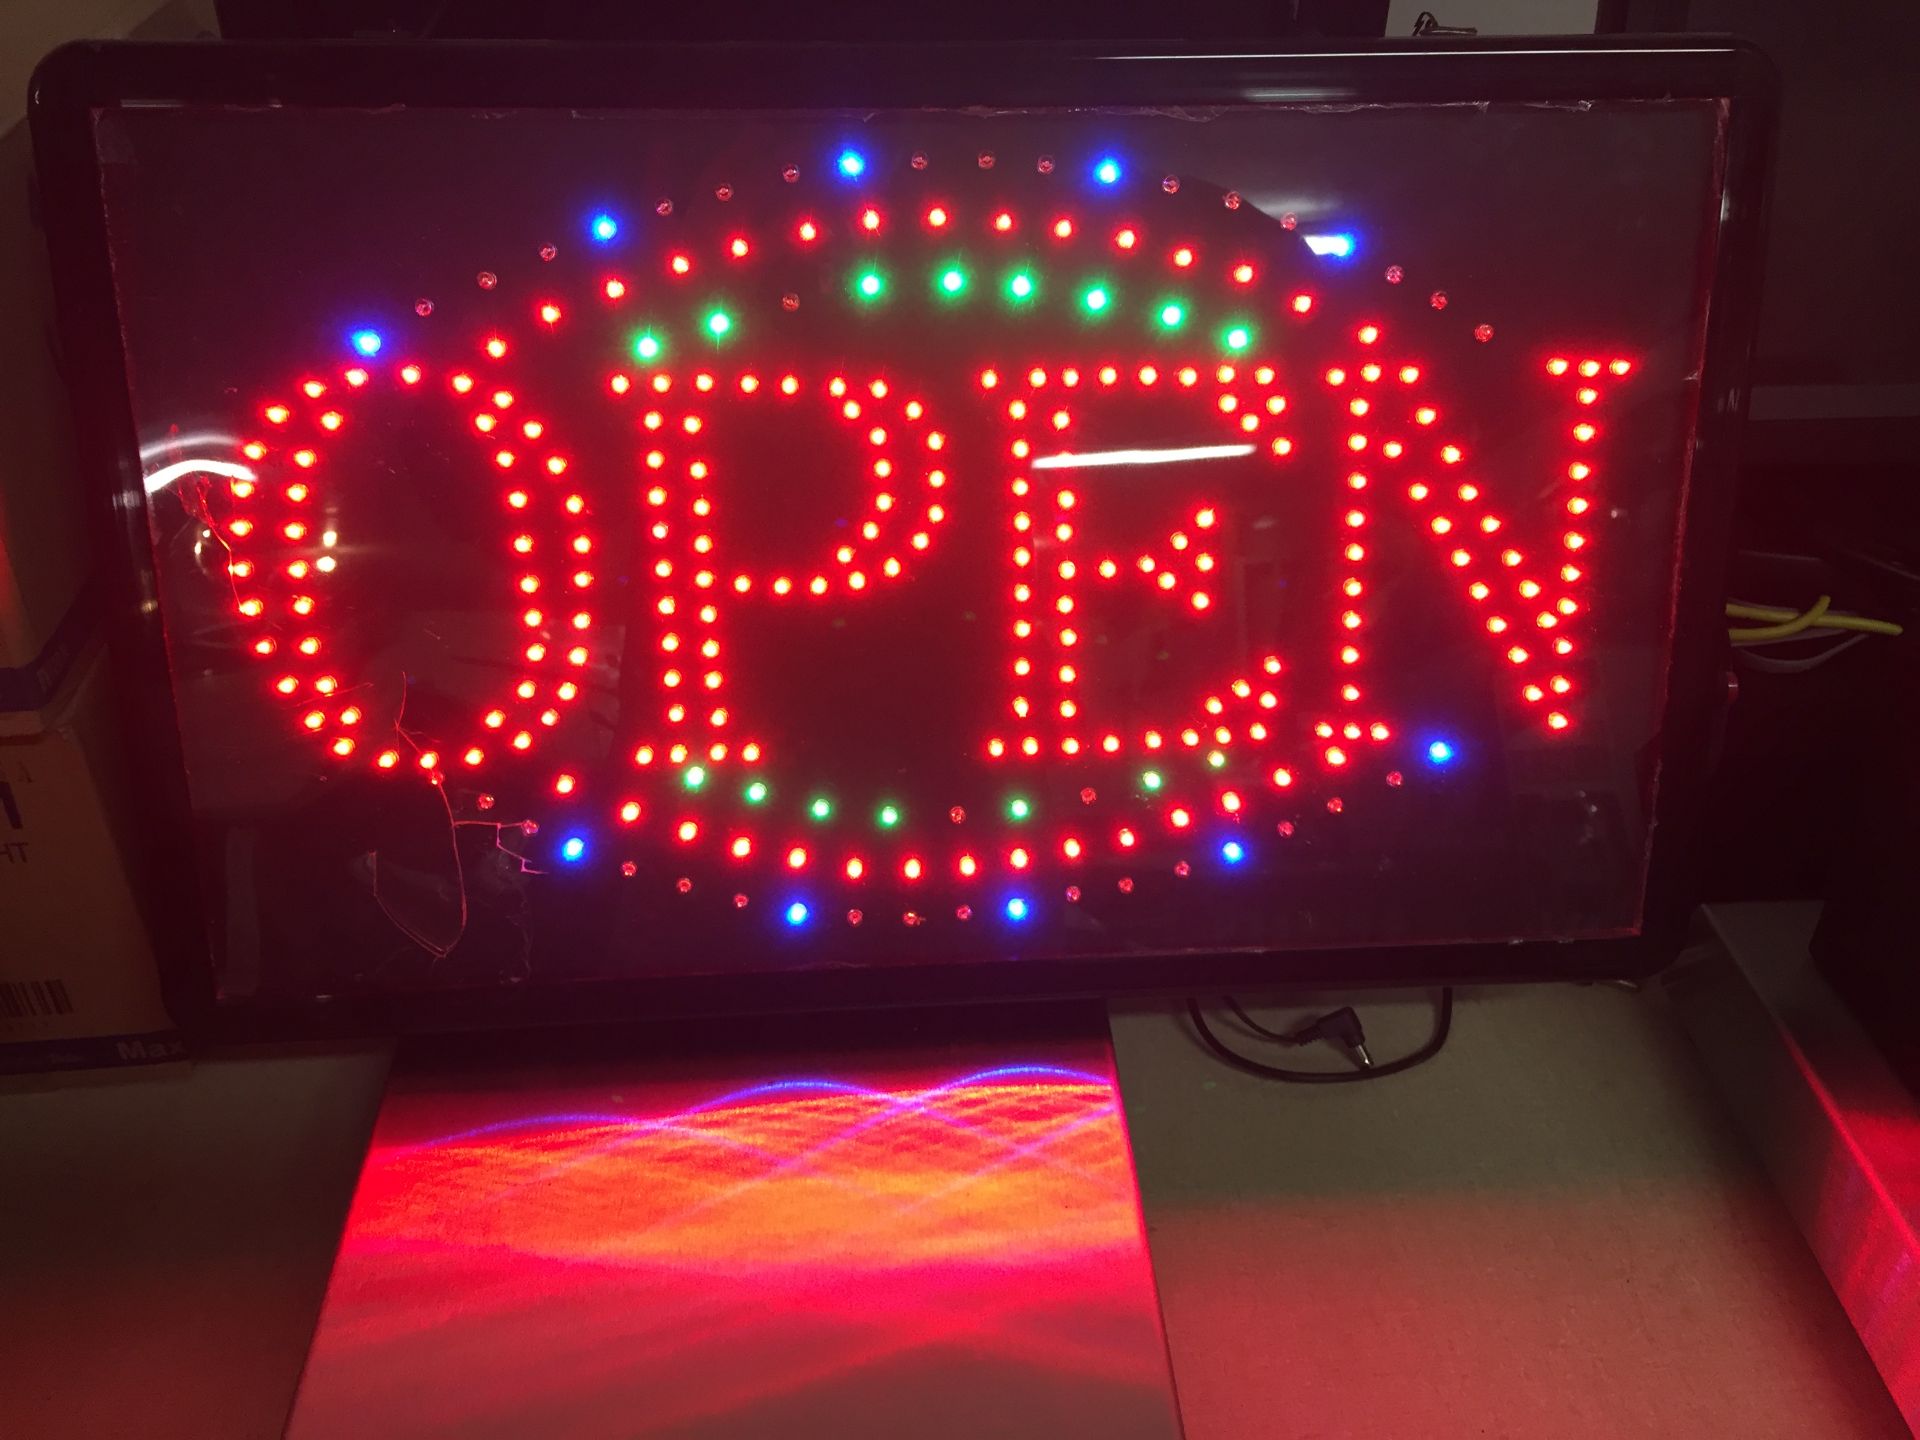 OPEN Sign